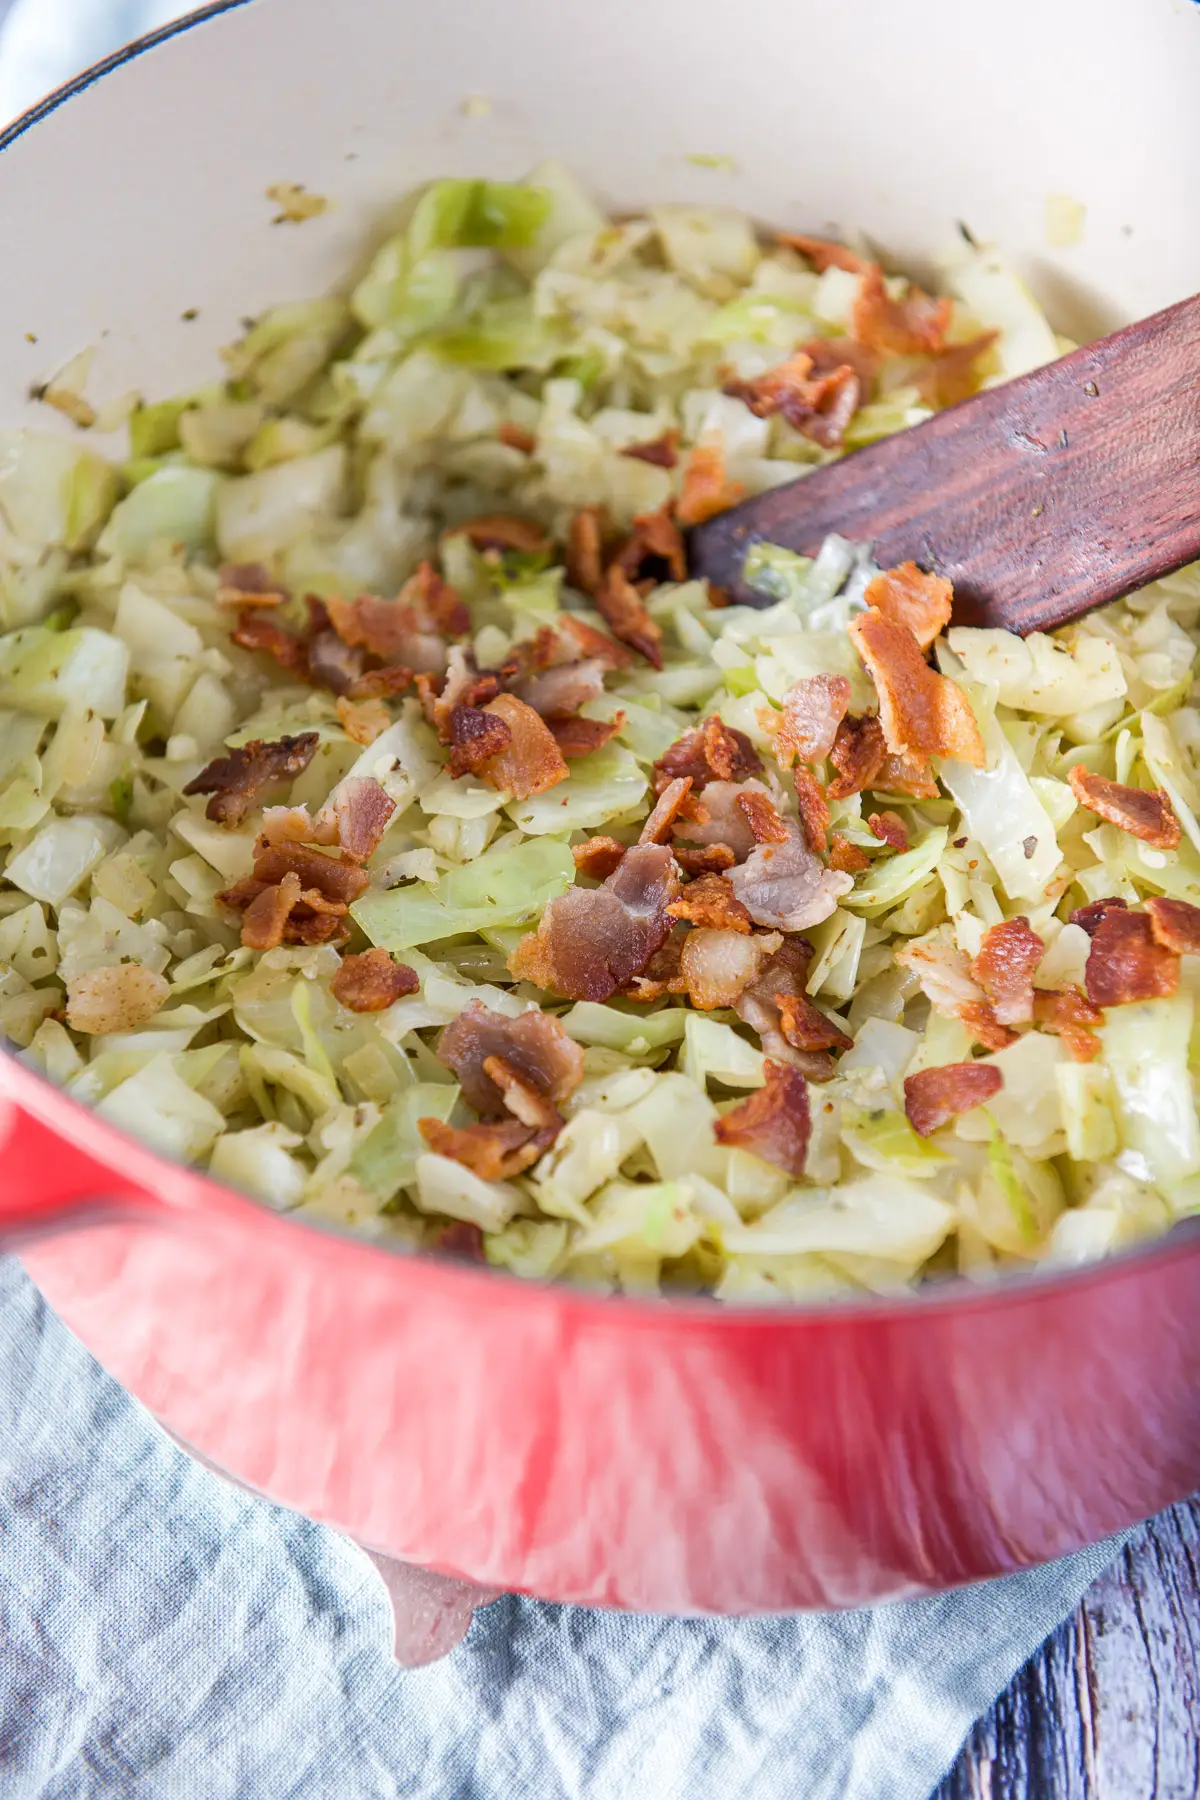 Cooked bacon crumbled on the cooked cabbage in a pan